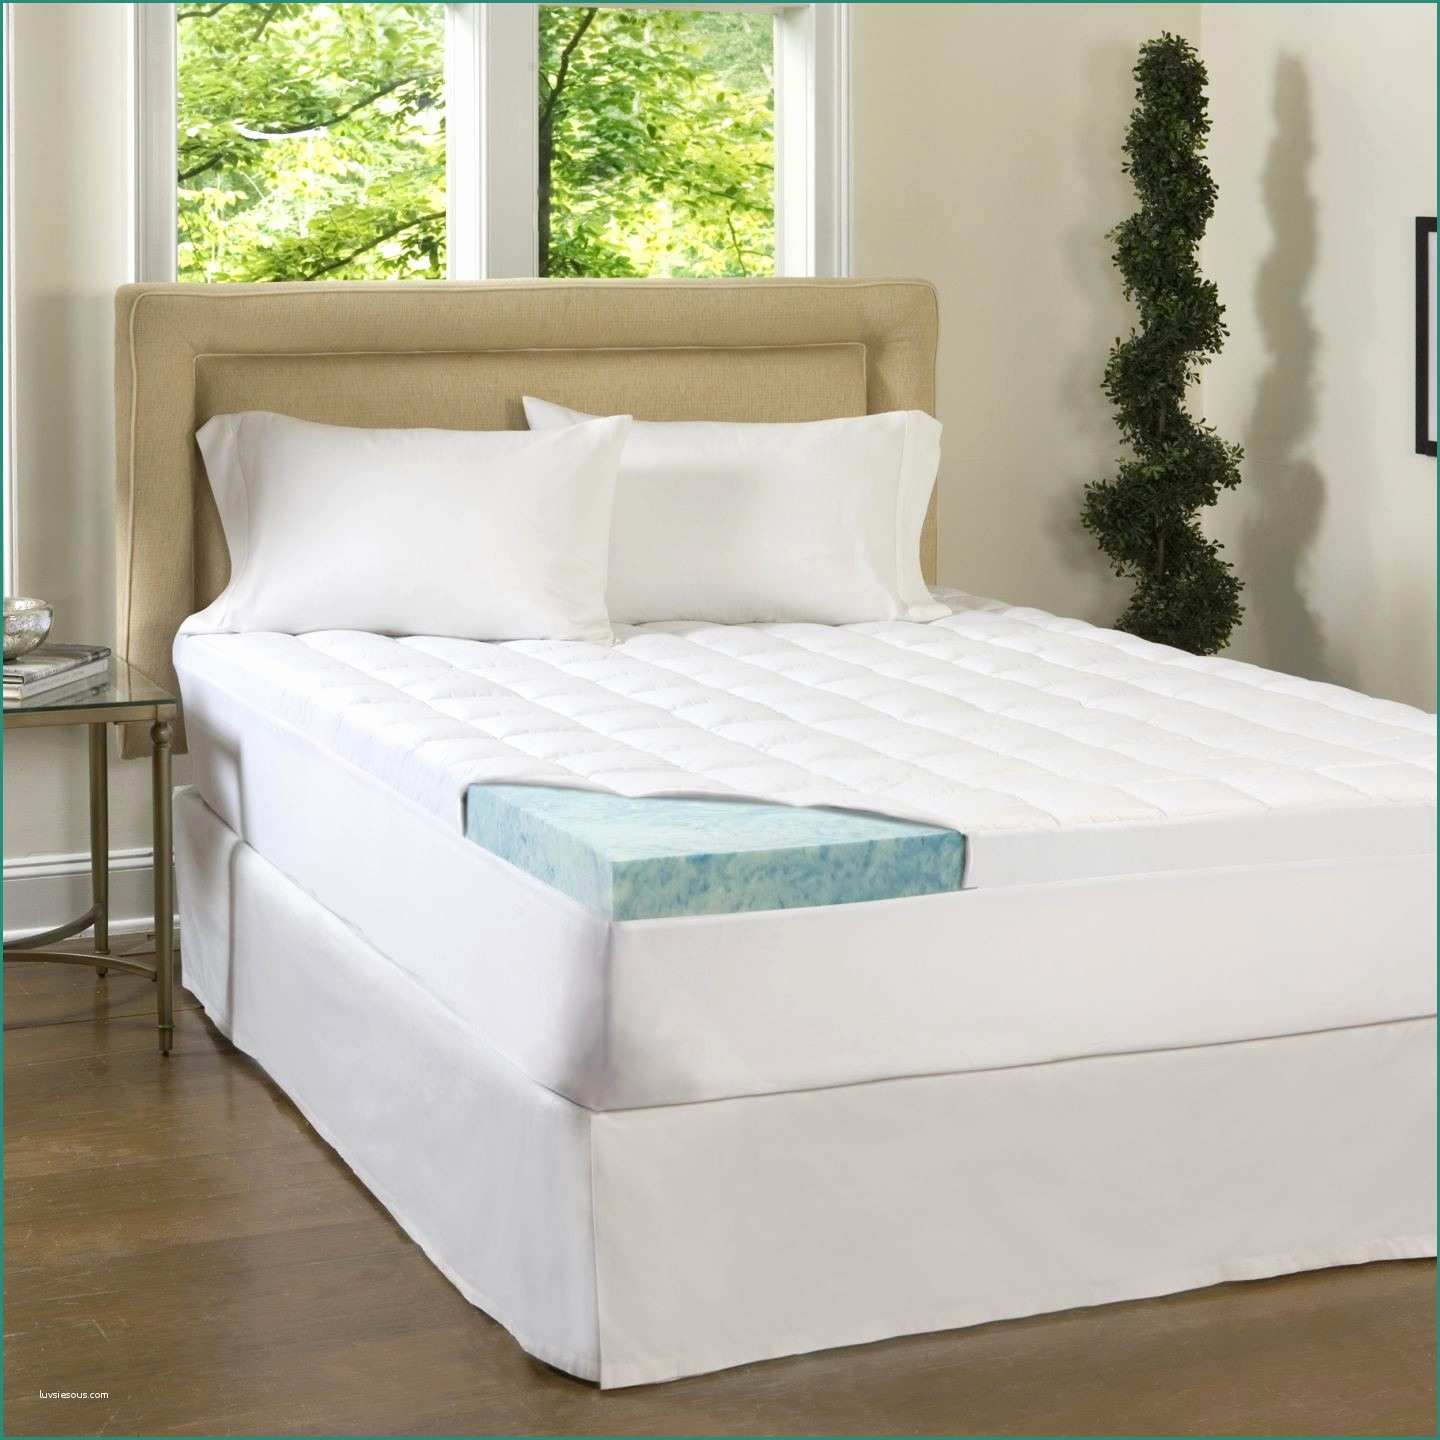 Materasso Royal Memory E 25 New Cheap Daybeds with Mattress Included